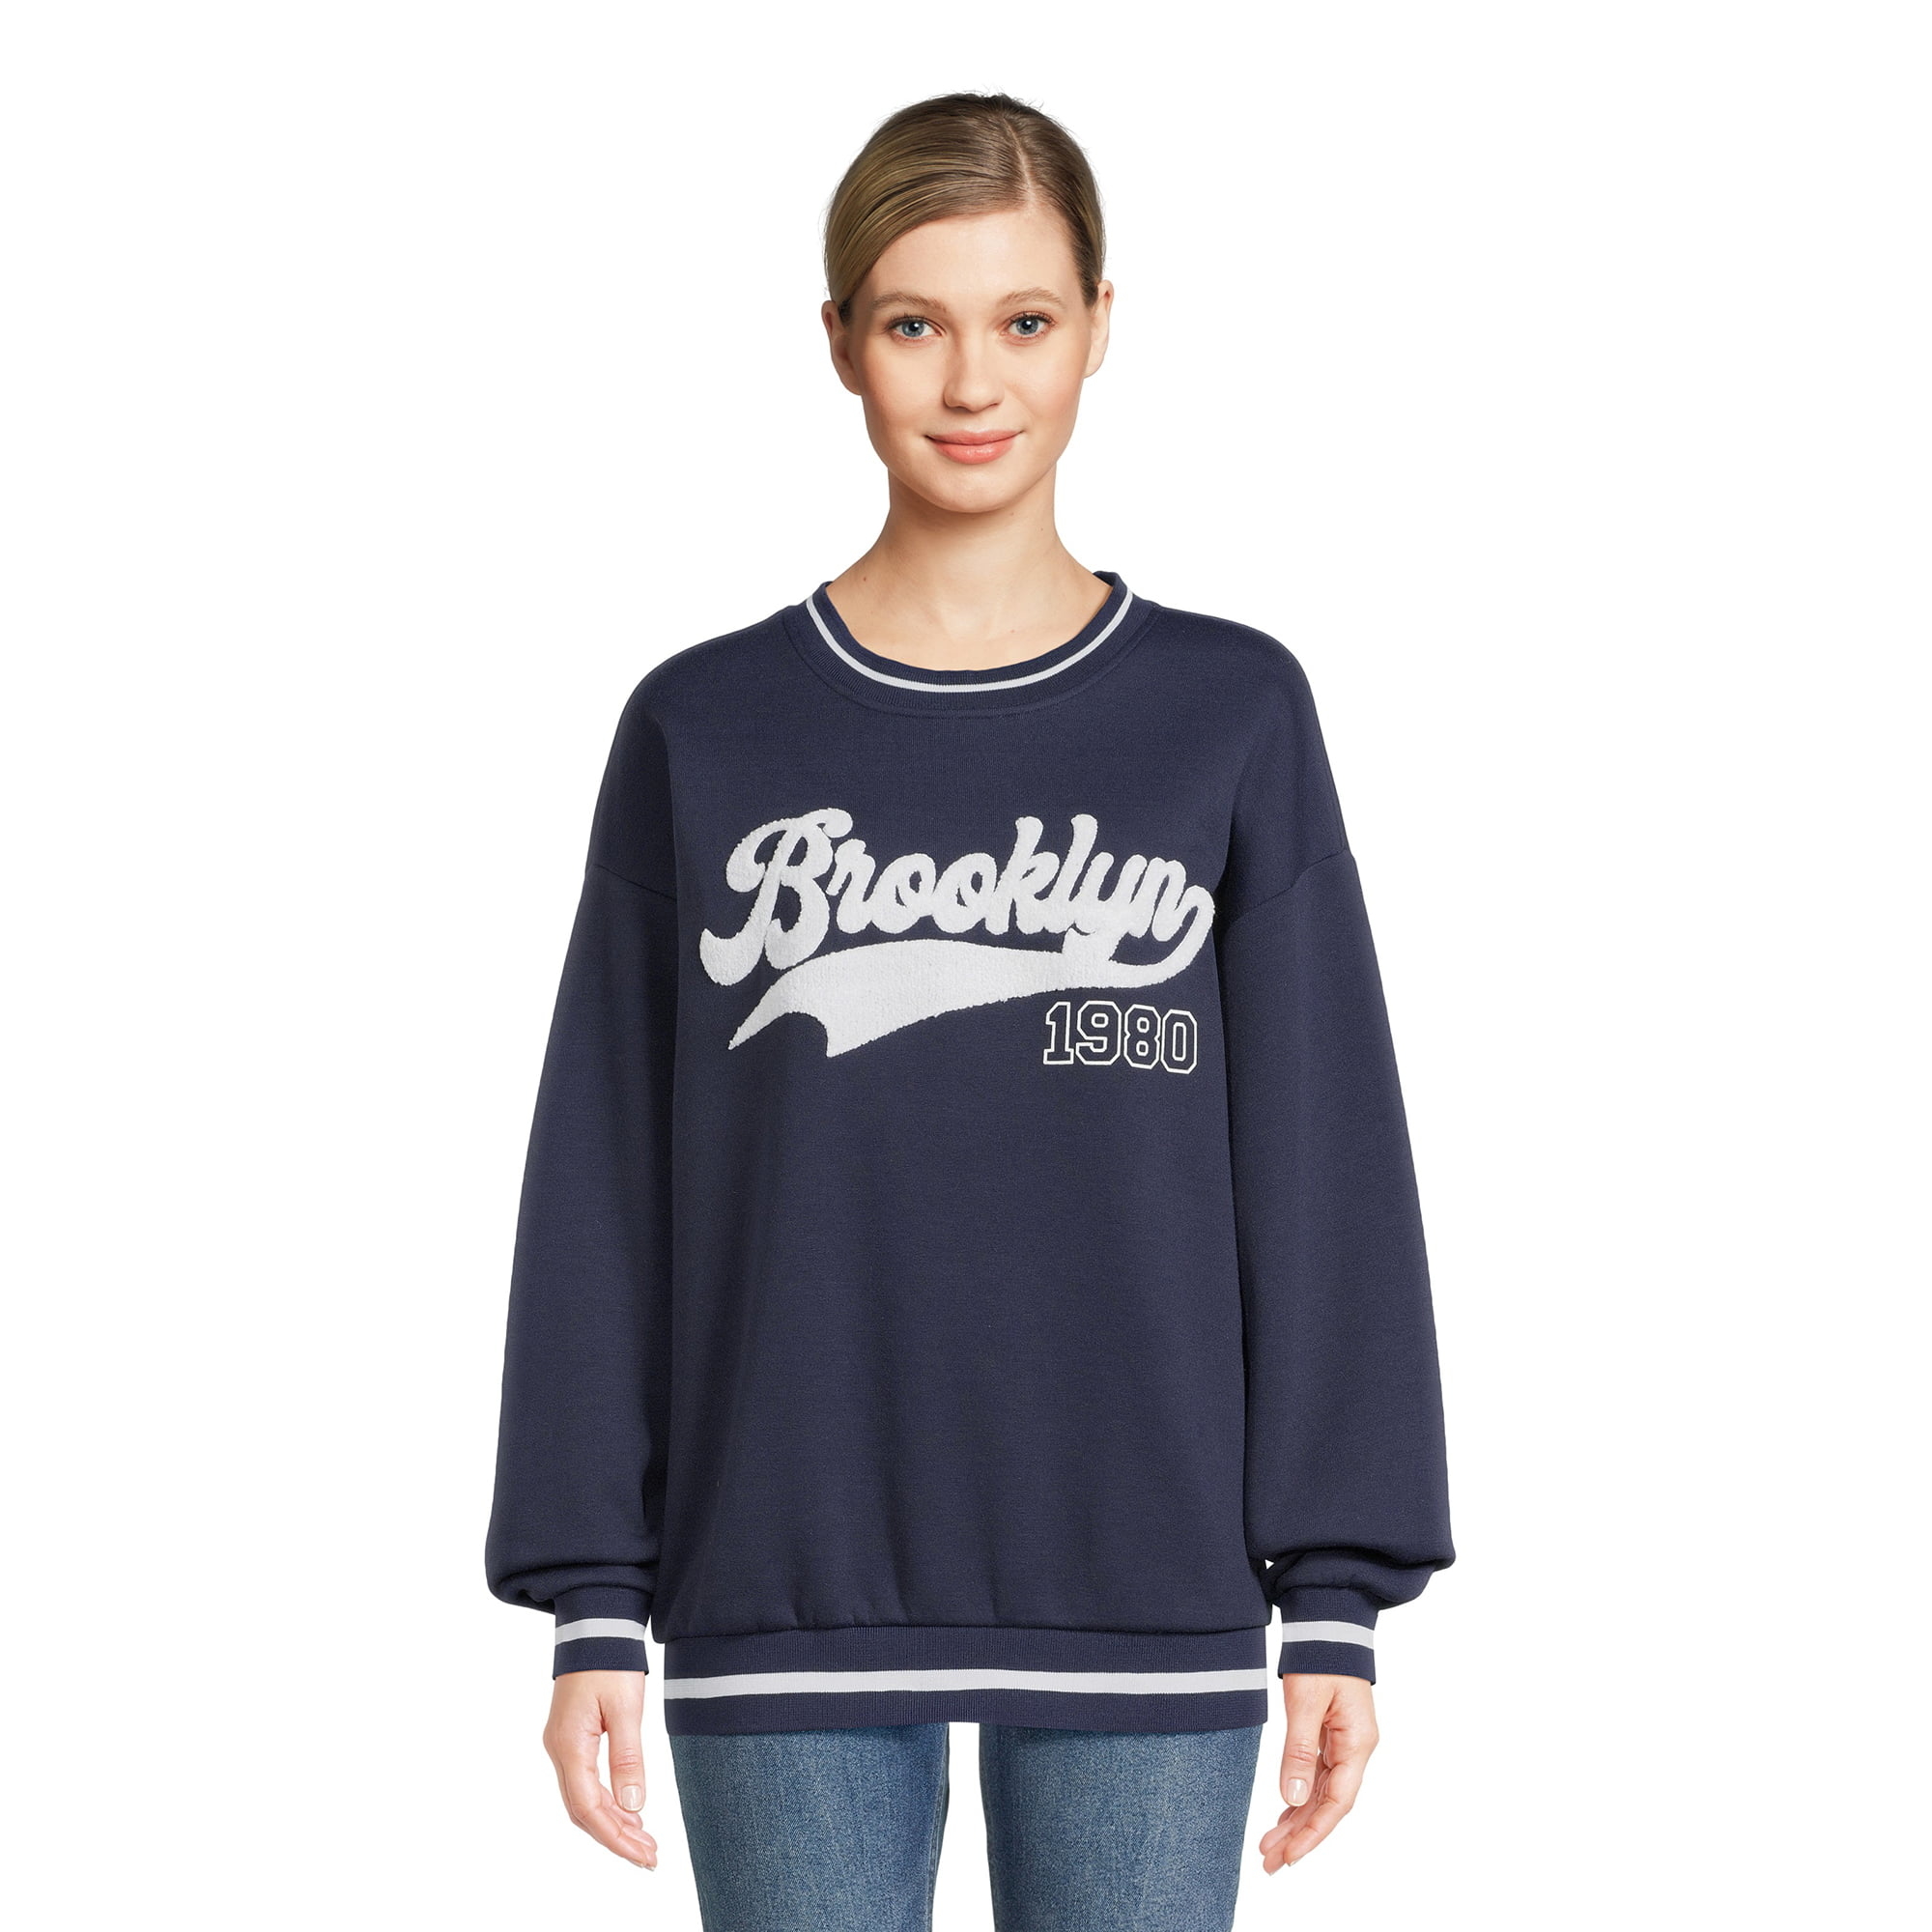 model wearing dark blue sweatshirt with &quot;Brooklyn&quot; on the front